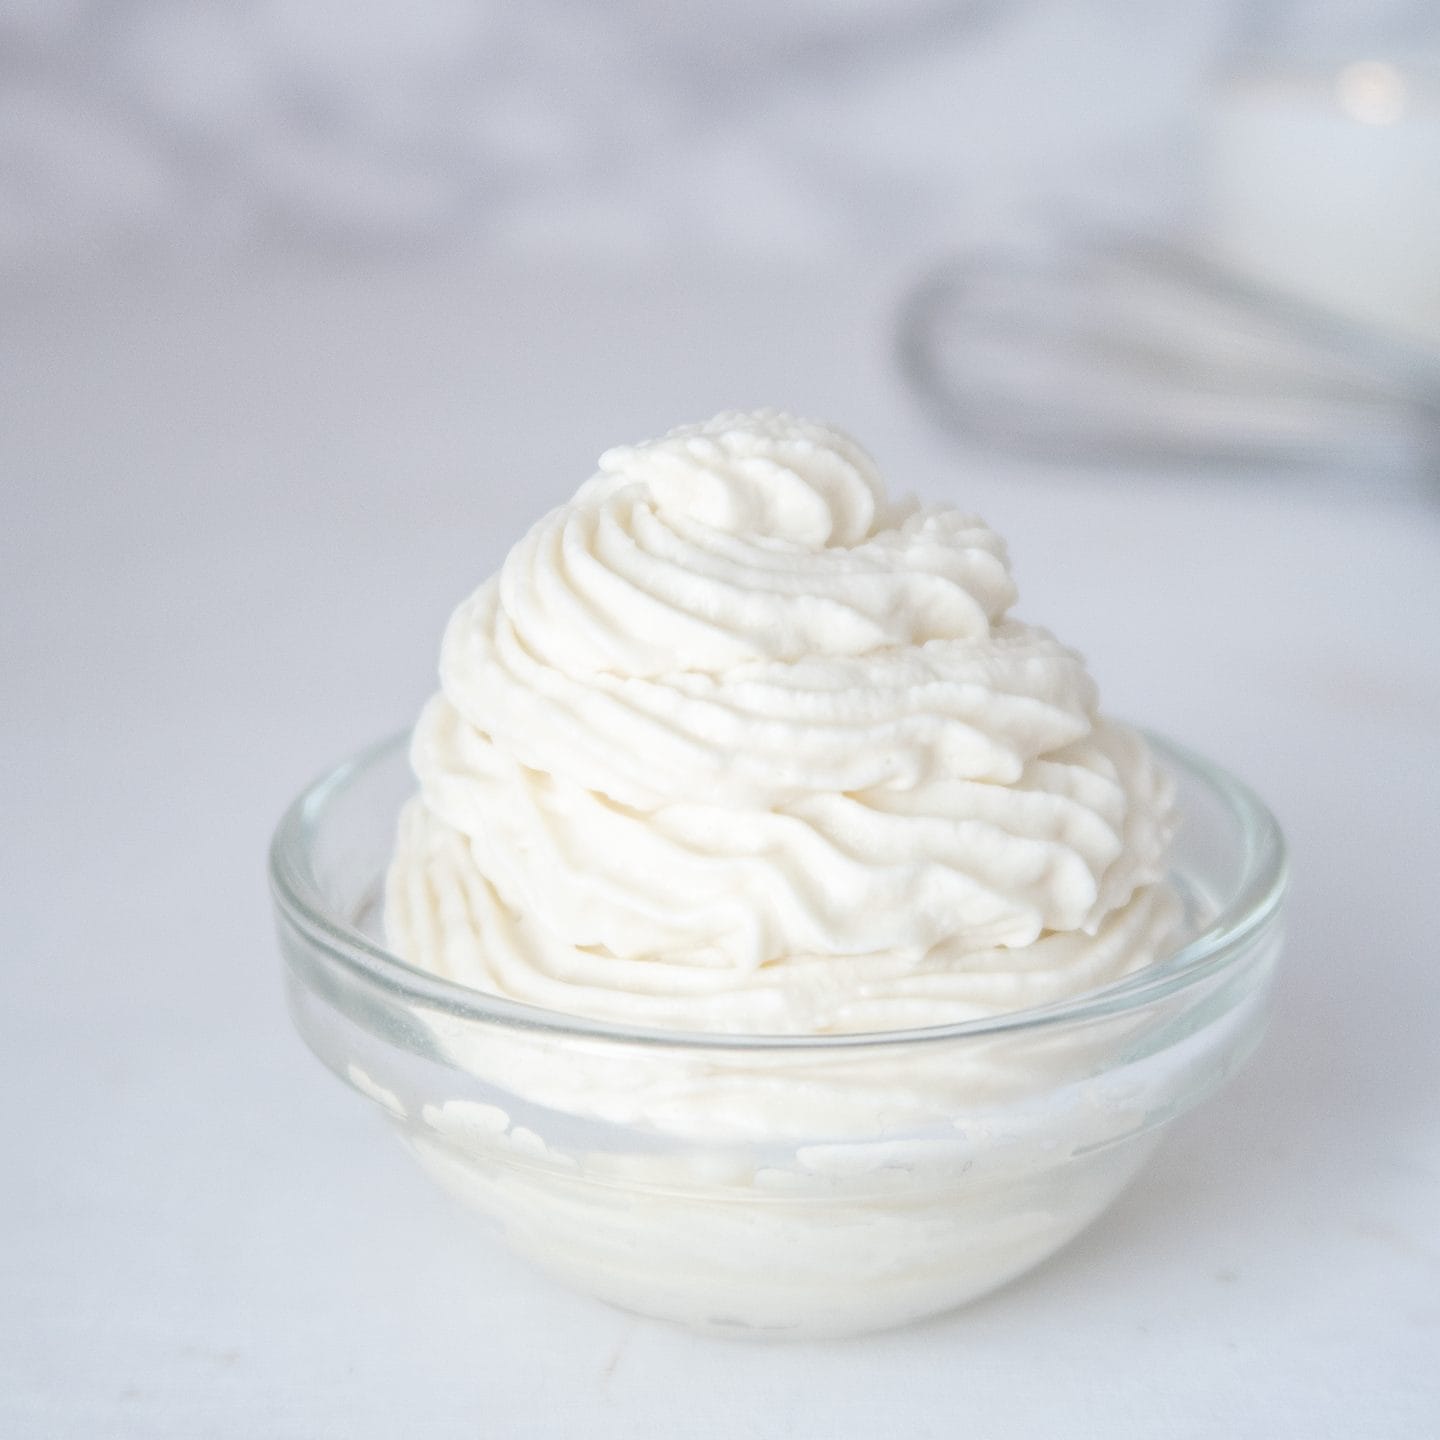 Notes of non dairy whipped cream recipe